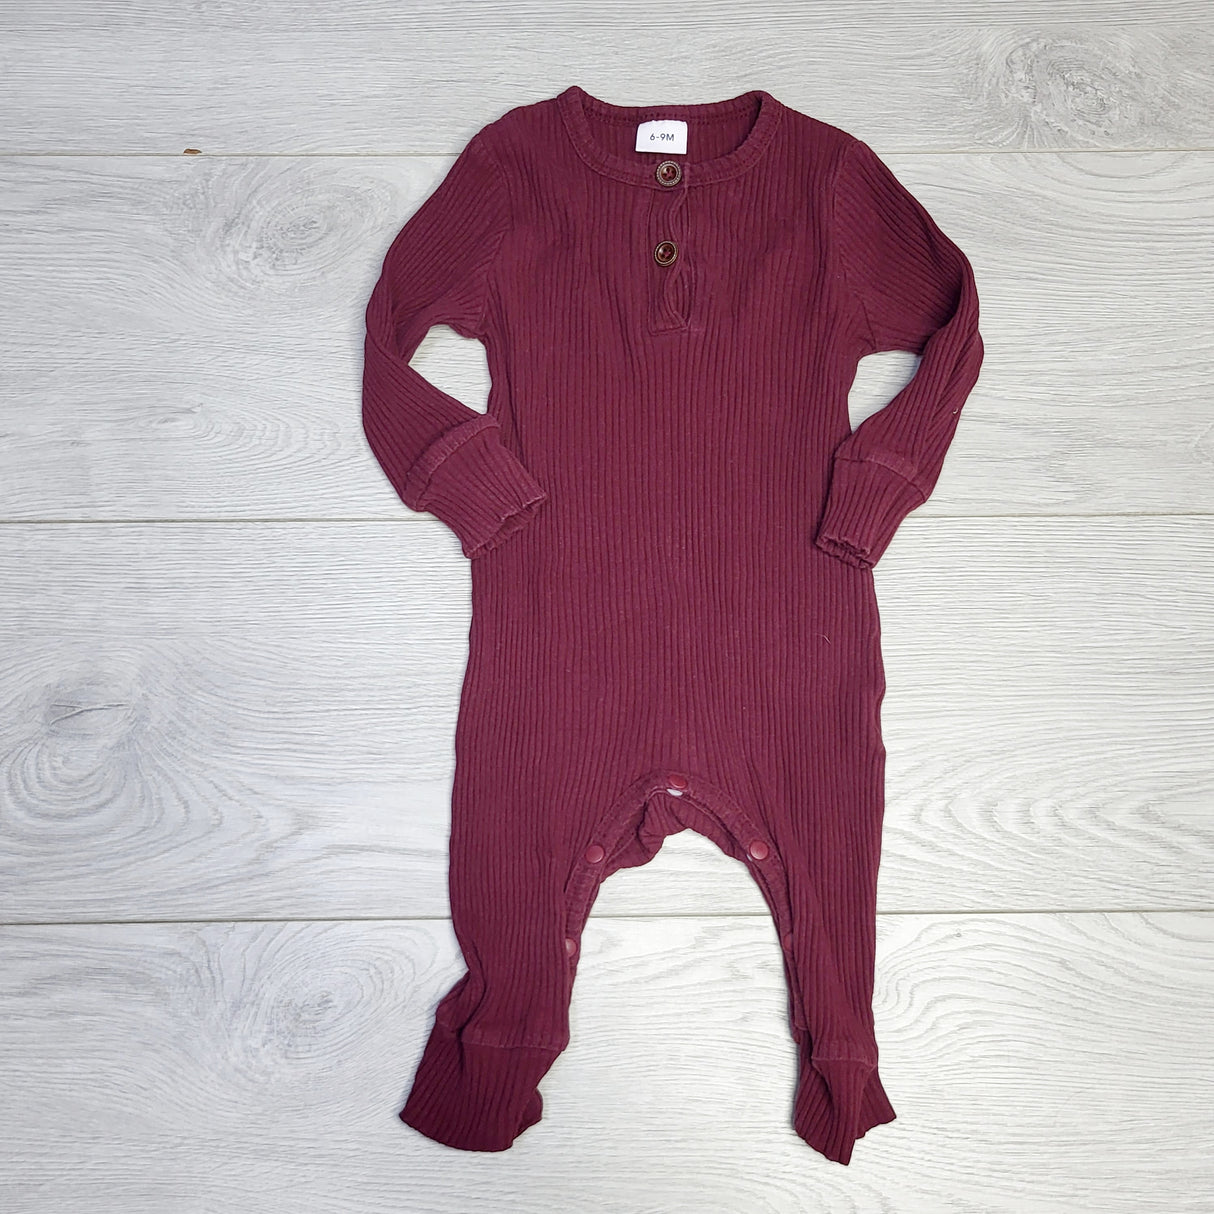 CRTH1 - Burgundy ribbed sleeper. Size 6-9 months